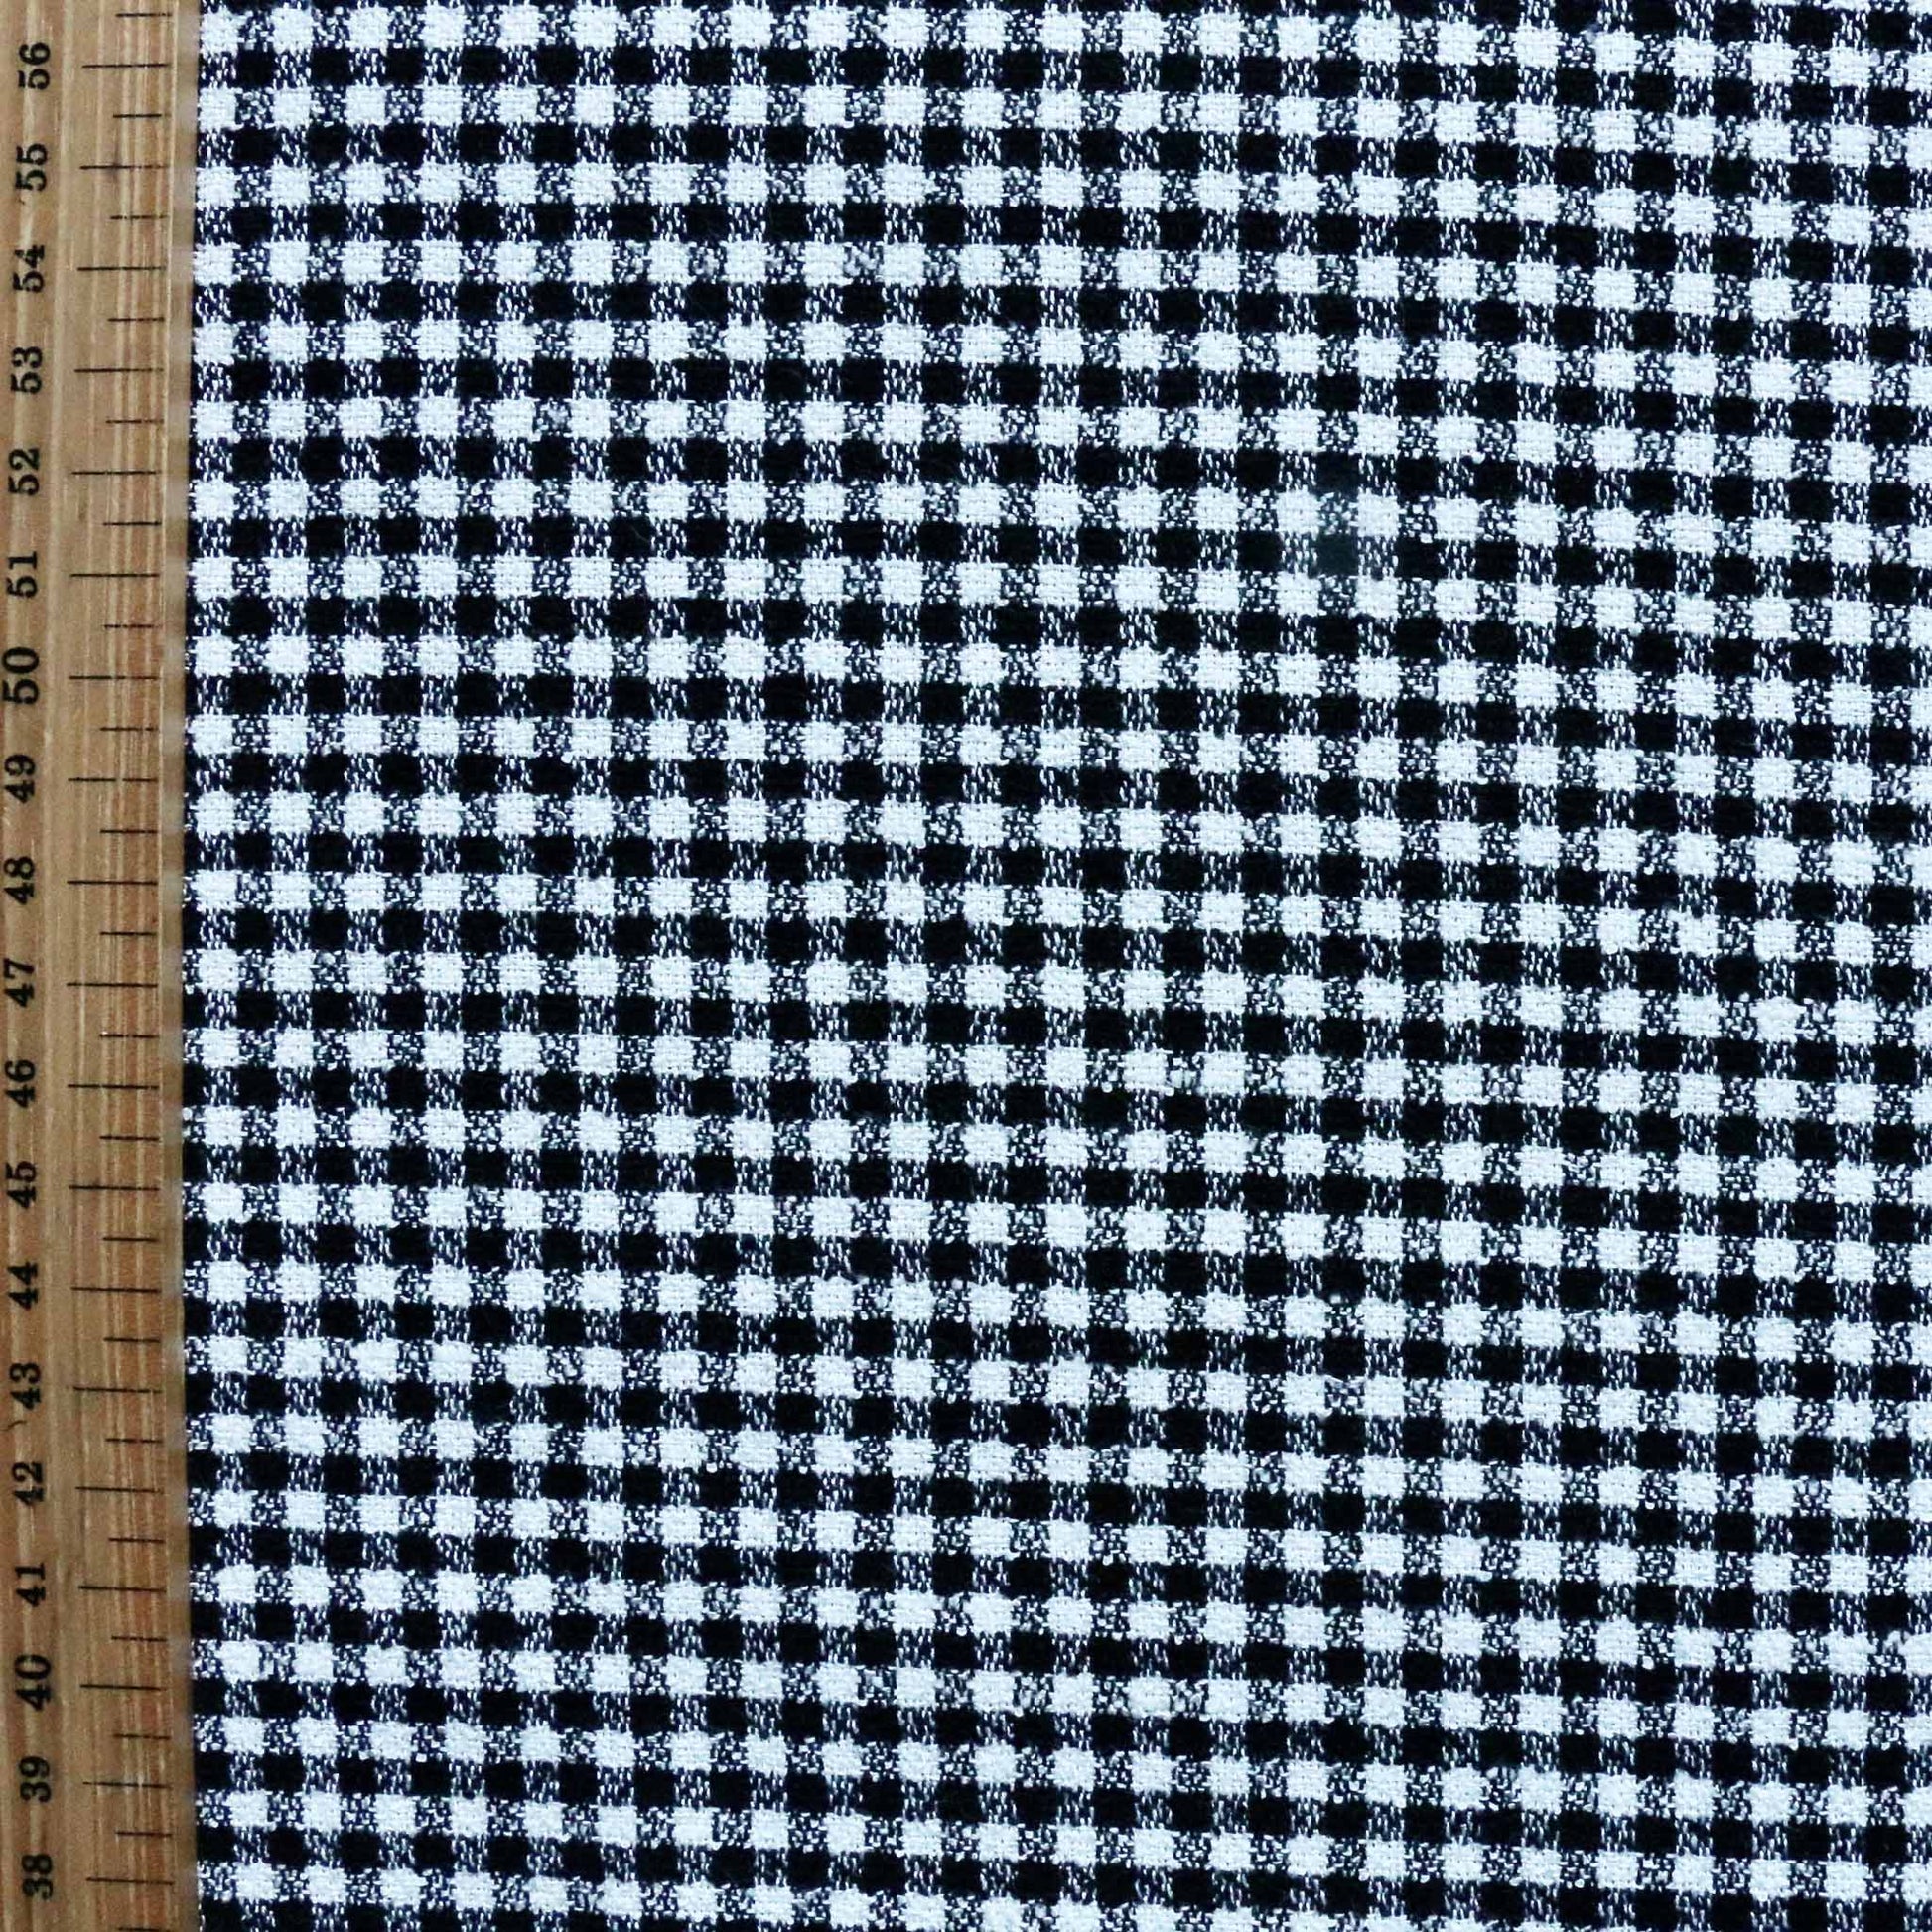 metre check viscose crepe fabric for dressmaking in black and white